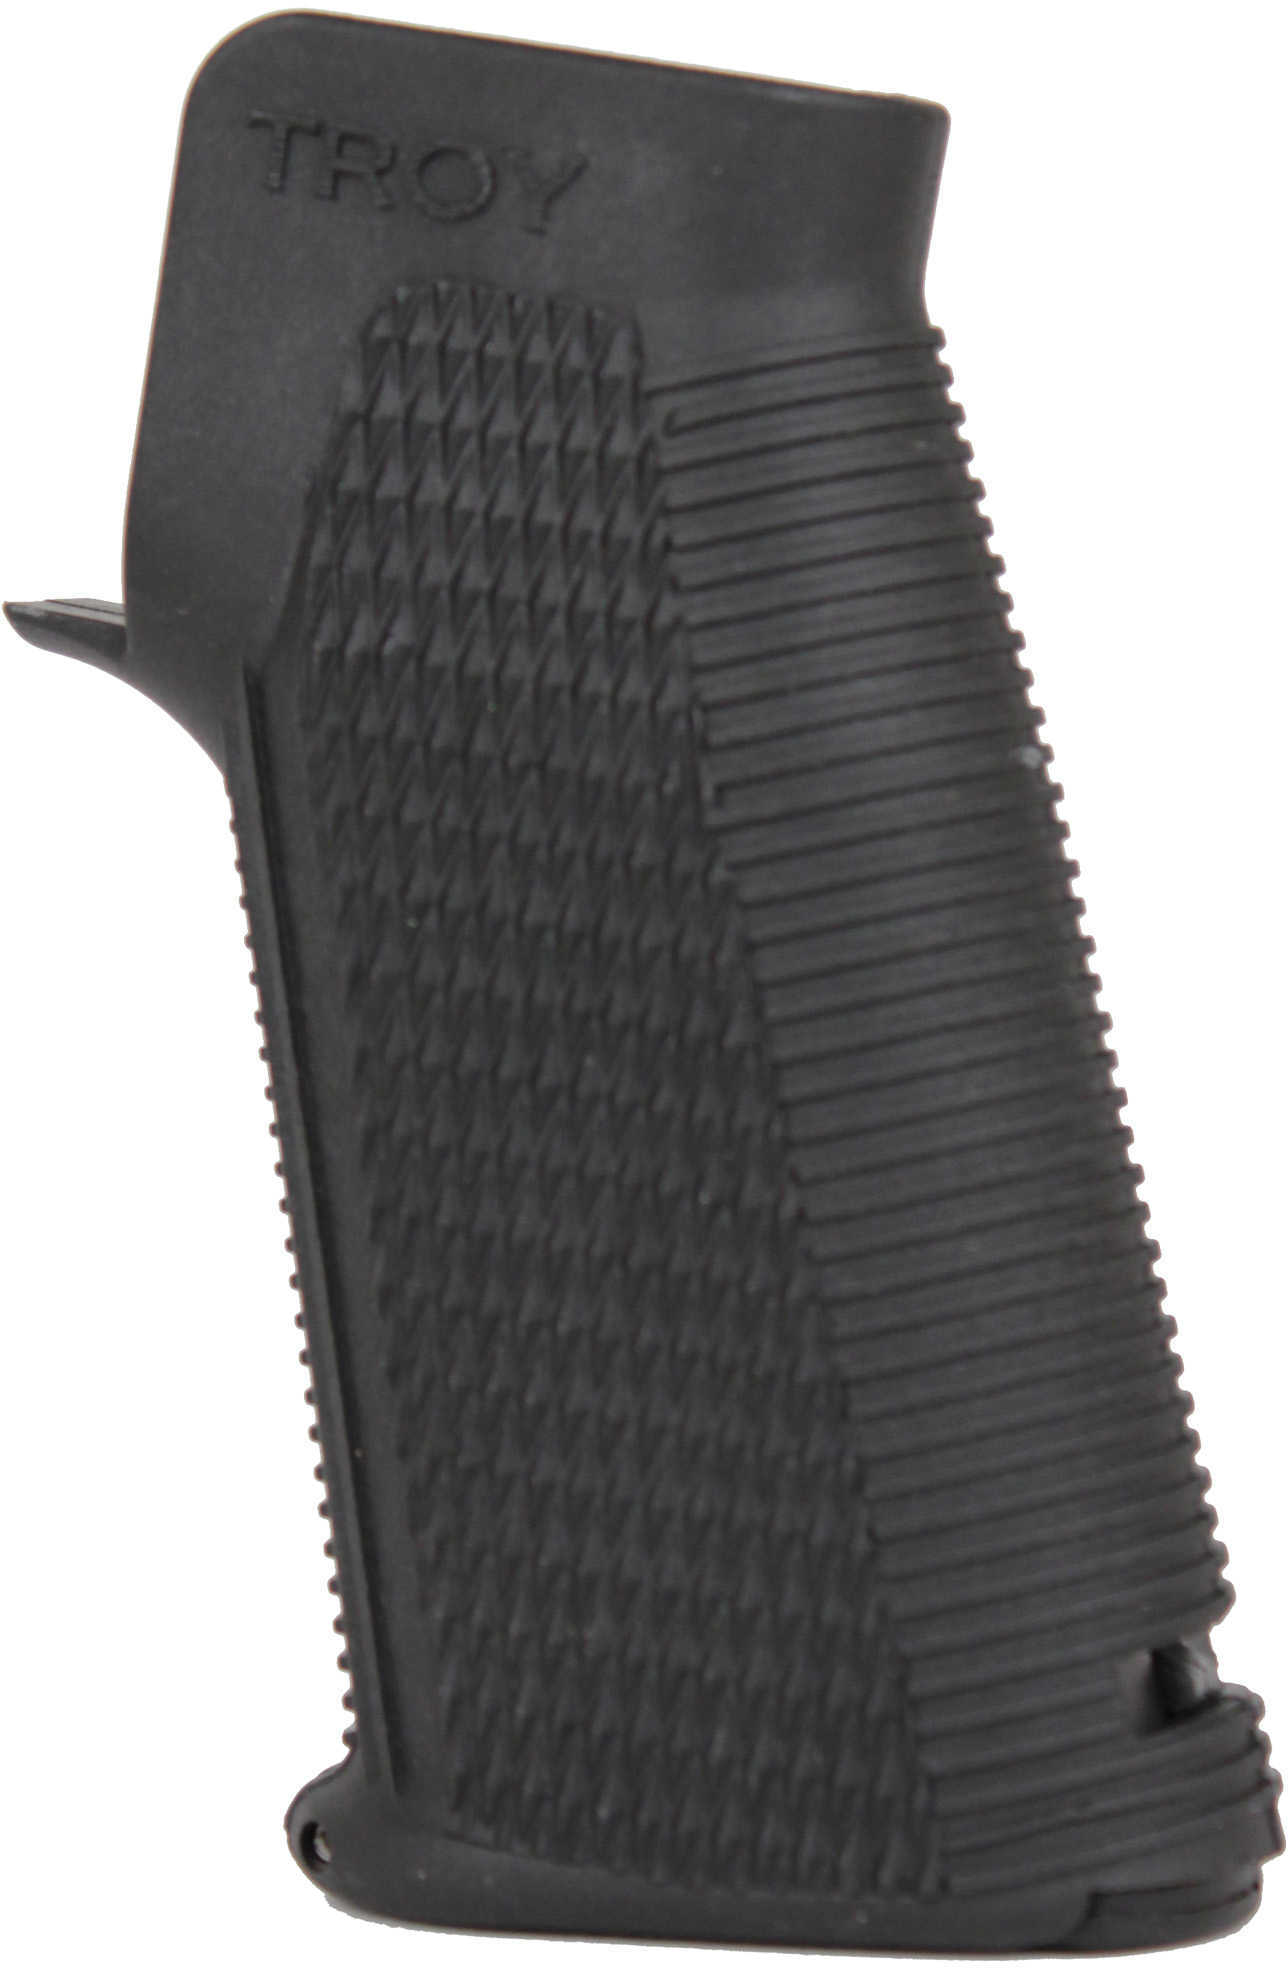 Troy Battle Ax CQB Polymer Grip Black Excellent Ergonomics And Superior Strength Of Rugged advanced Military Grade P